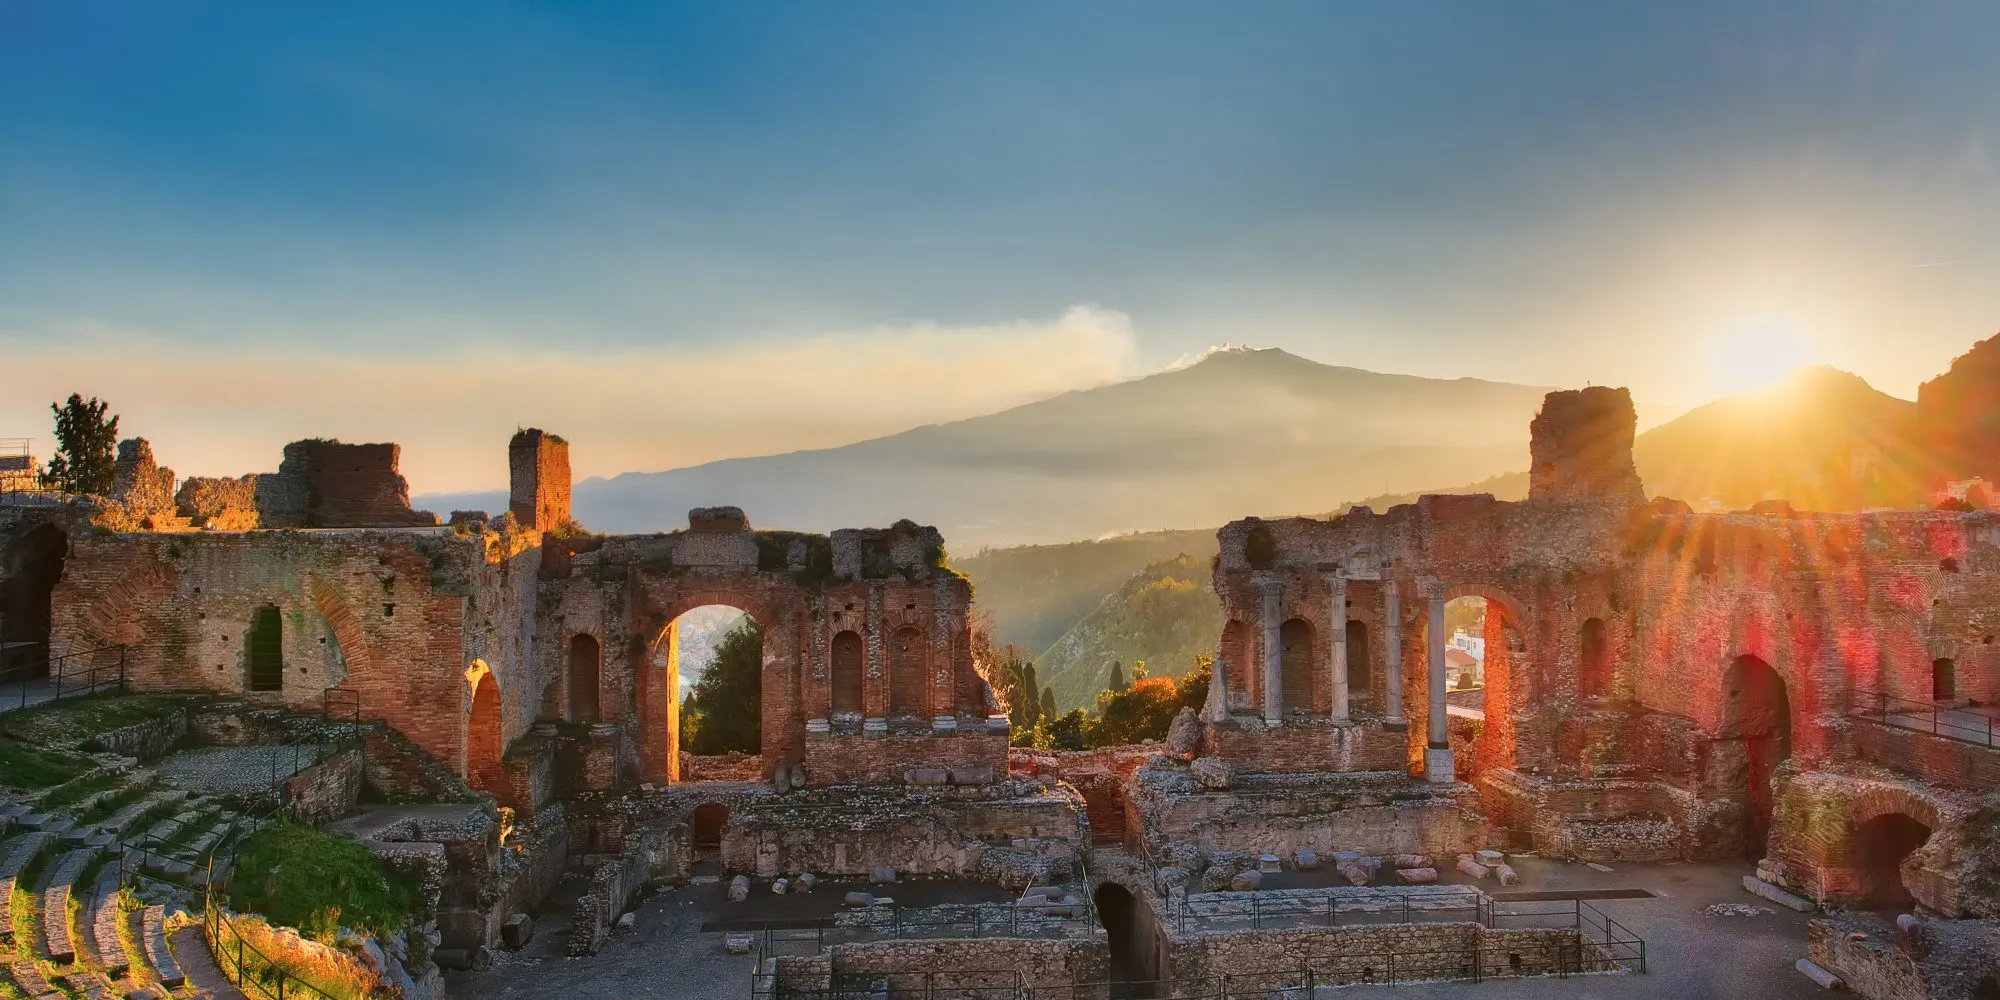 Particular of Ancient theatre of Taormina  Sicily Italy with Etna  erupting volcano at sunset